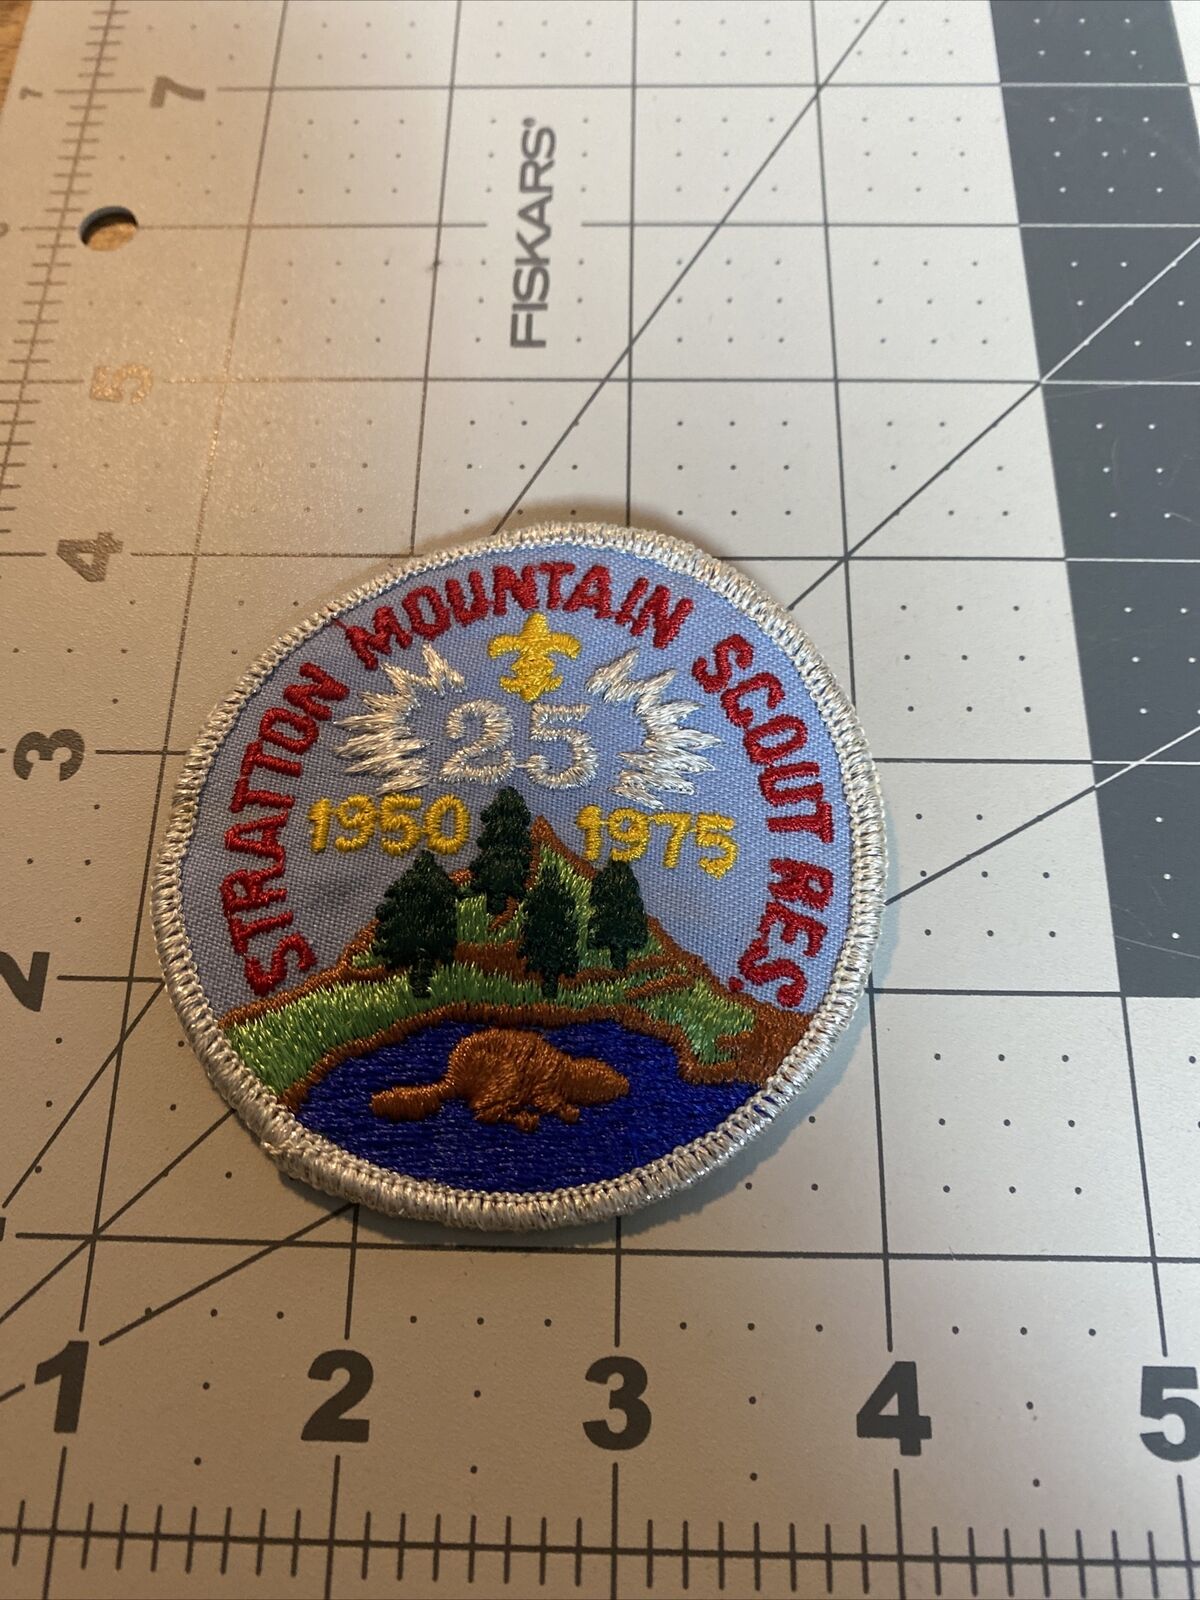 1975 STRATTON MOUNTAIN Scout Reservation 25TH ANNIV UNCLE SAM Council 53C-602E